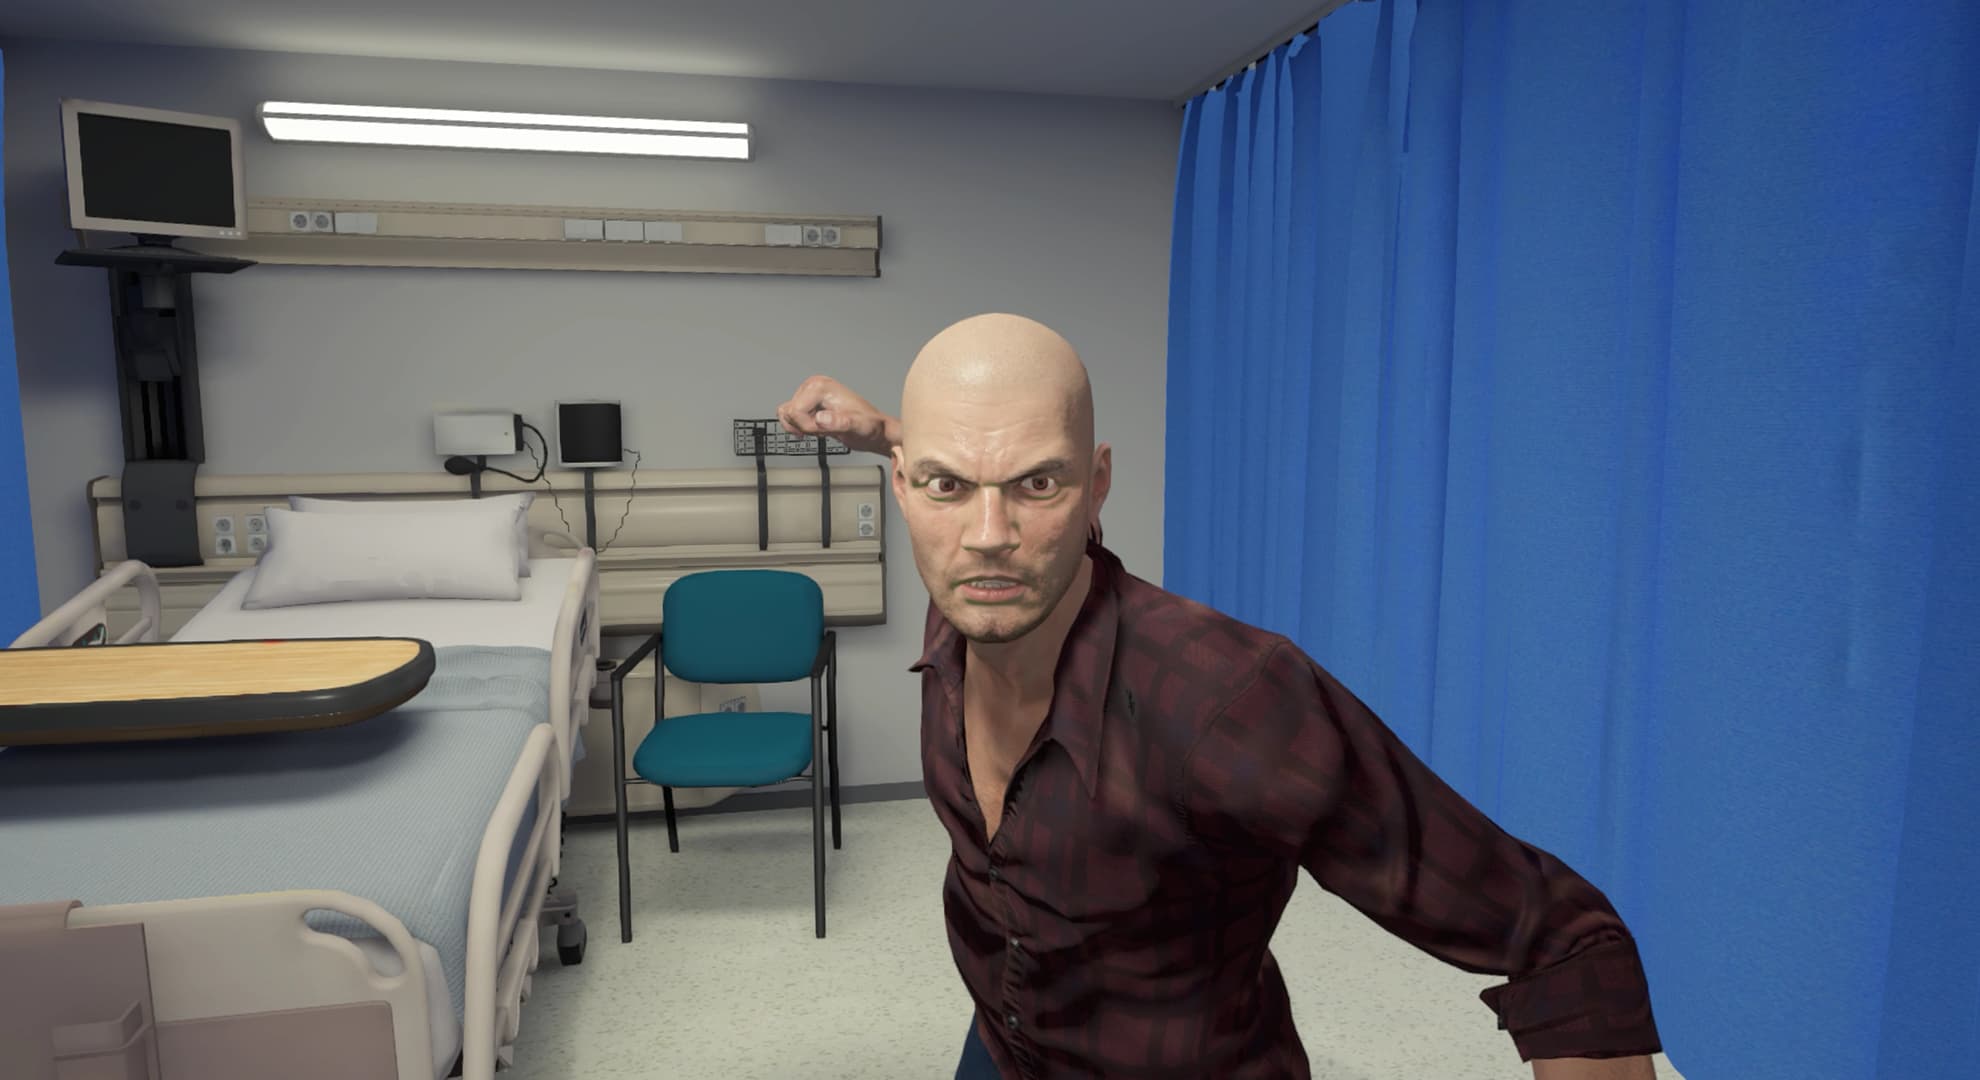 Motion captured image of a hostile patient rearing back to punch towards the viewer.